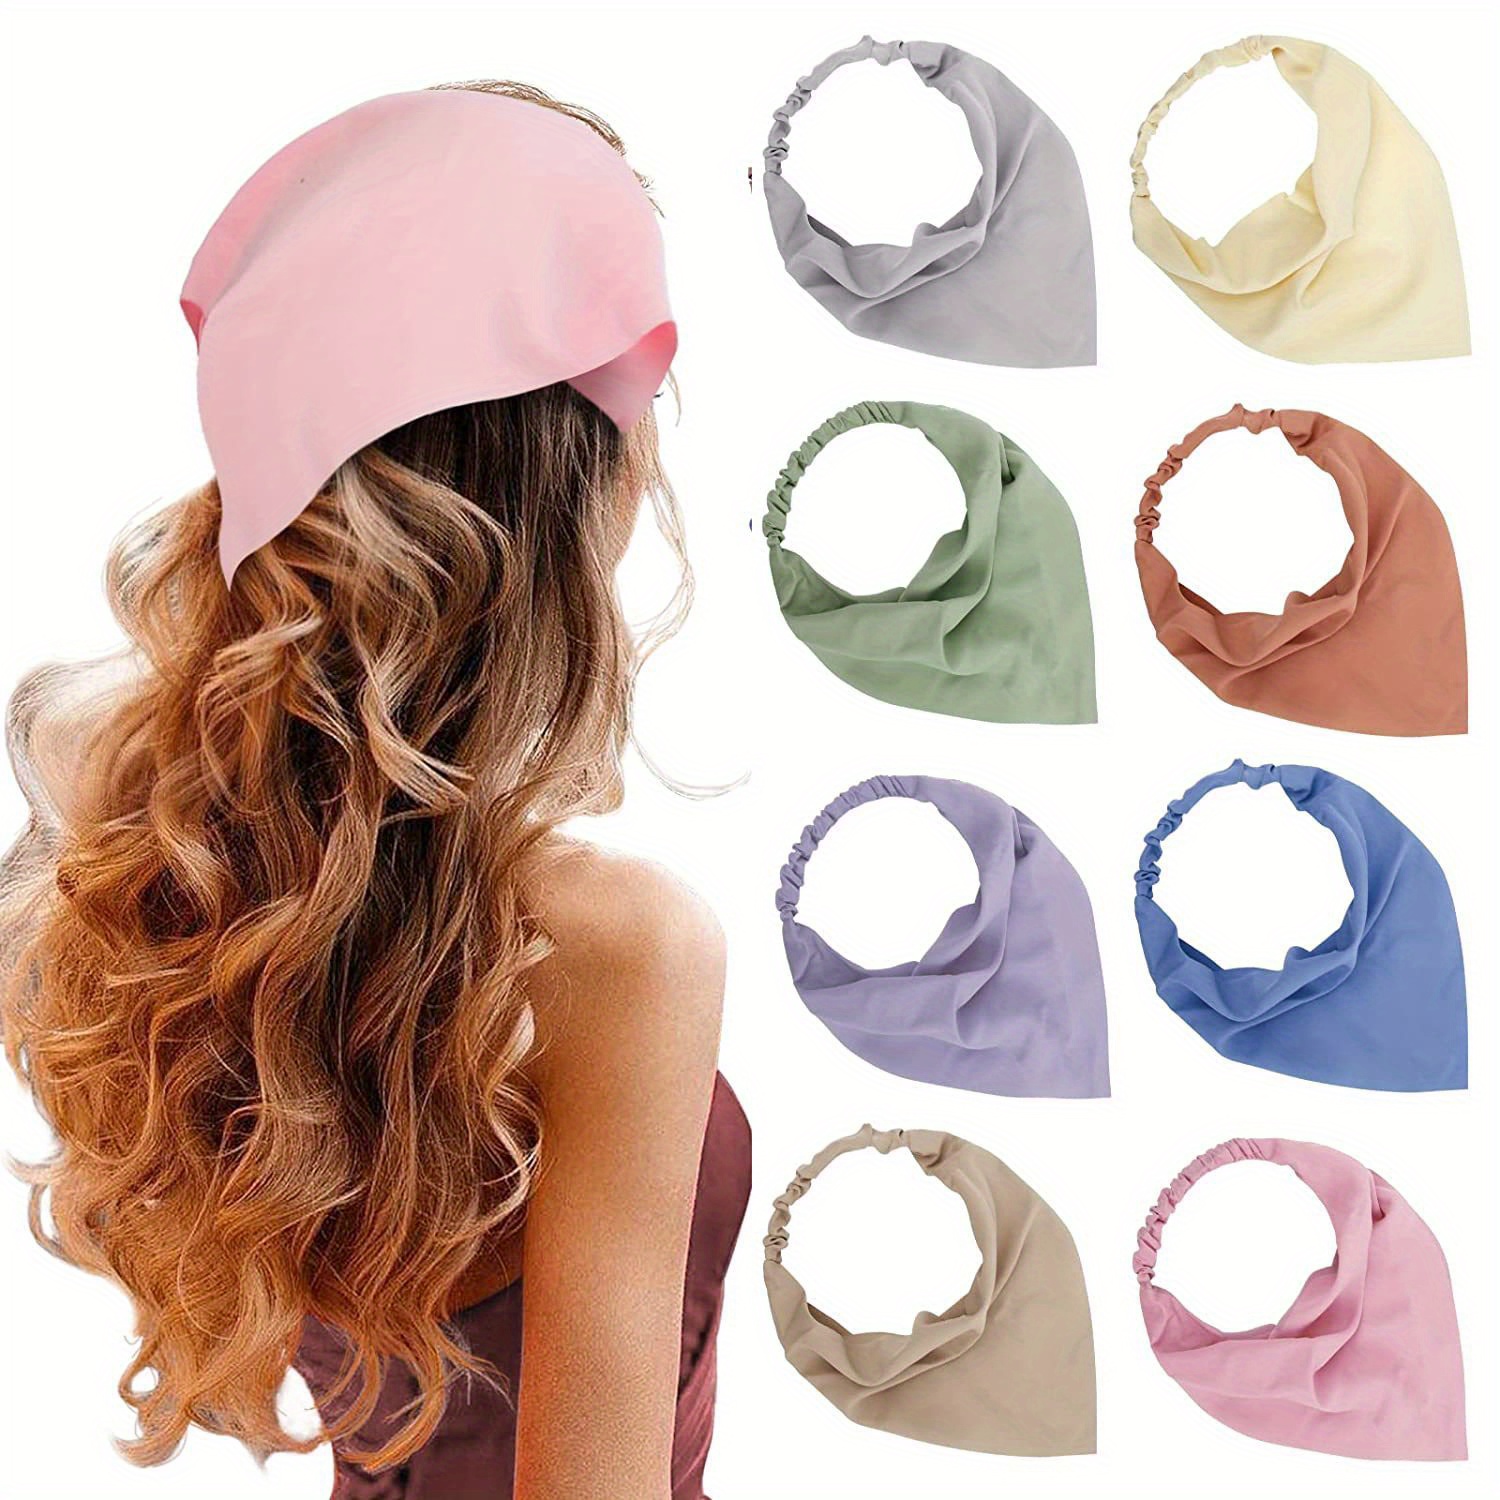 

8pcs Solid Color Elastic Triangular Head Bands Stylish Hair Hoops Trendy Hair Accessories For Women And Daily Use Wear